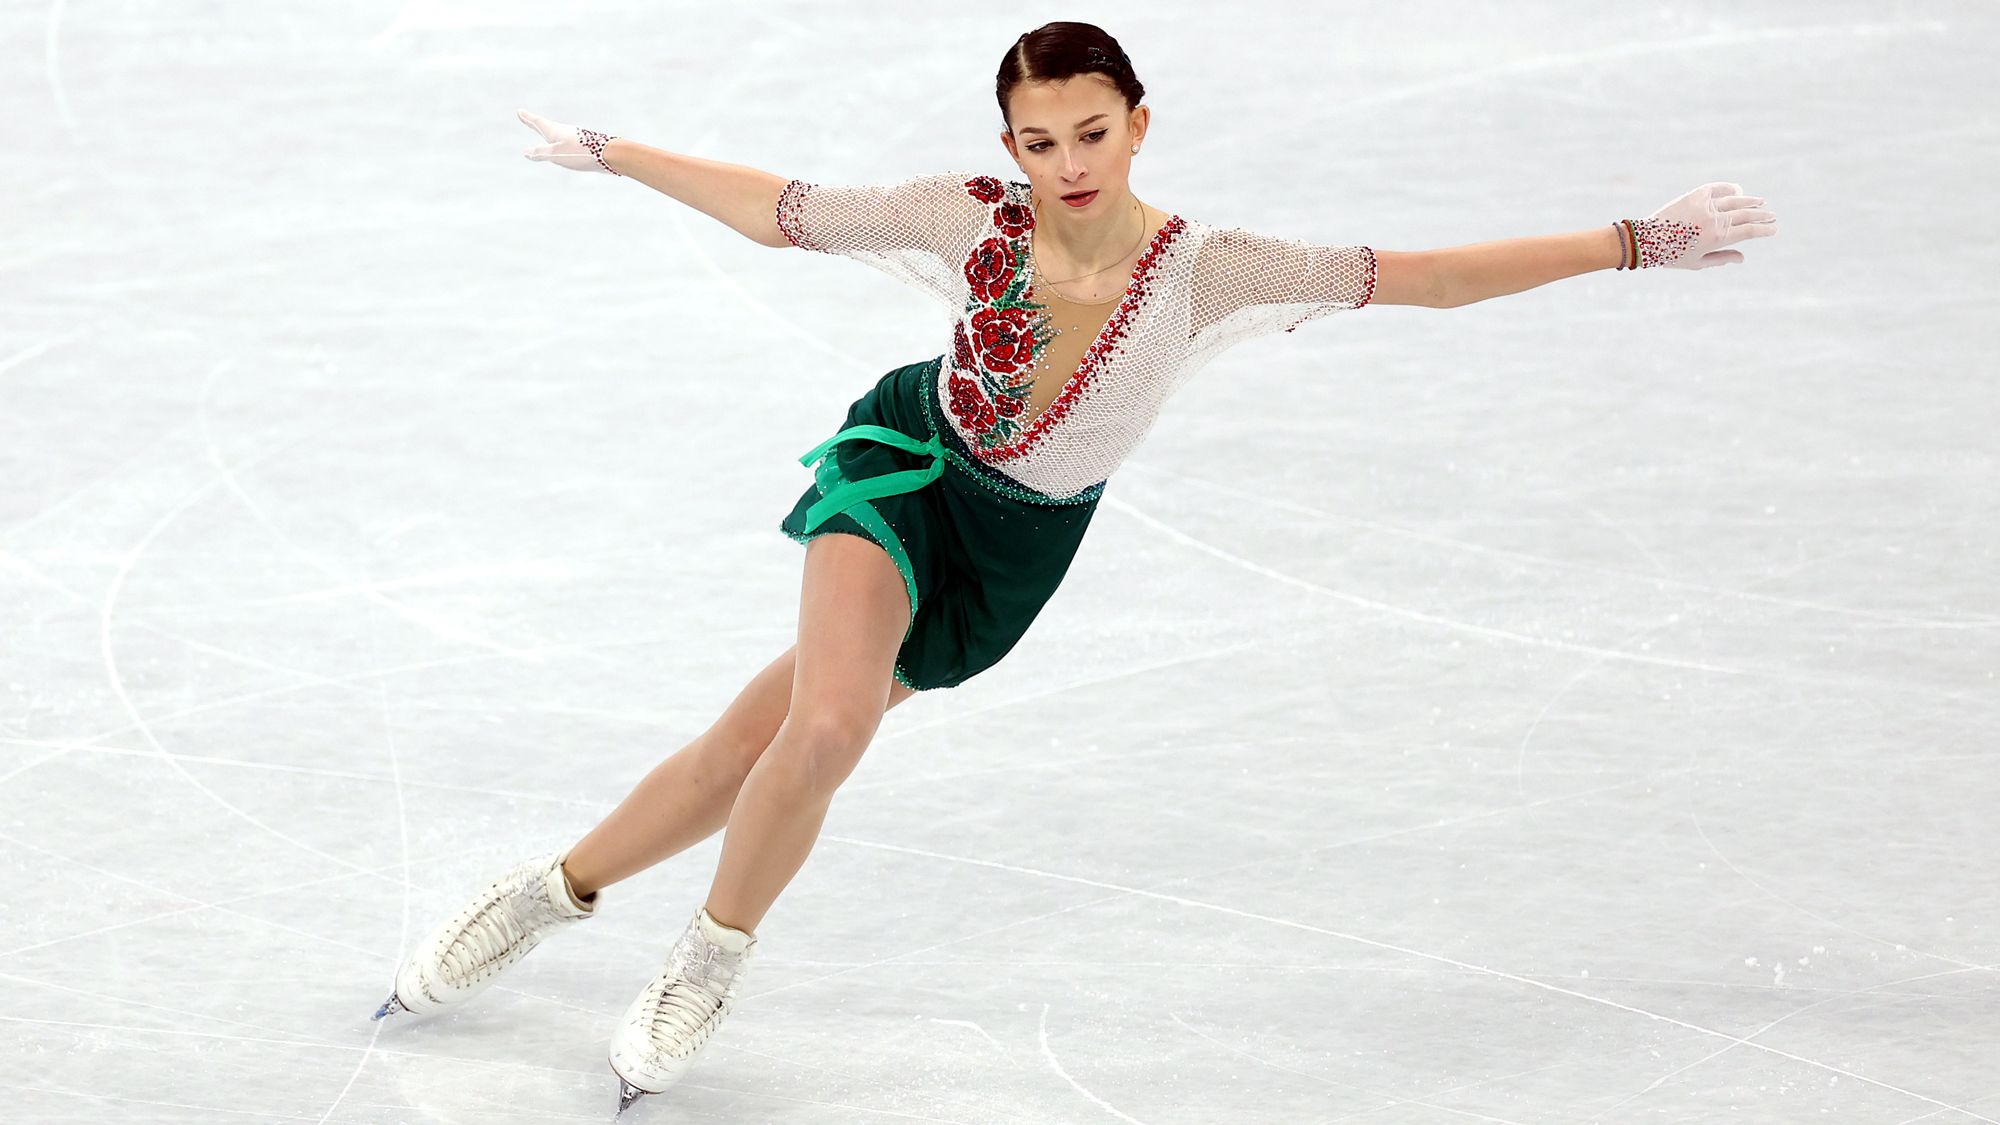 These are some of the most memorable figure skating fashions from